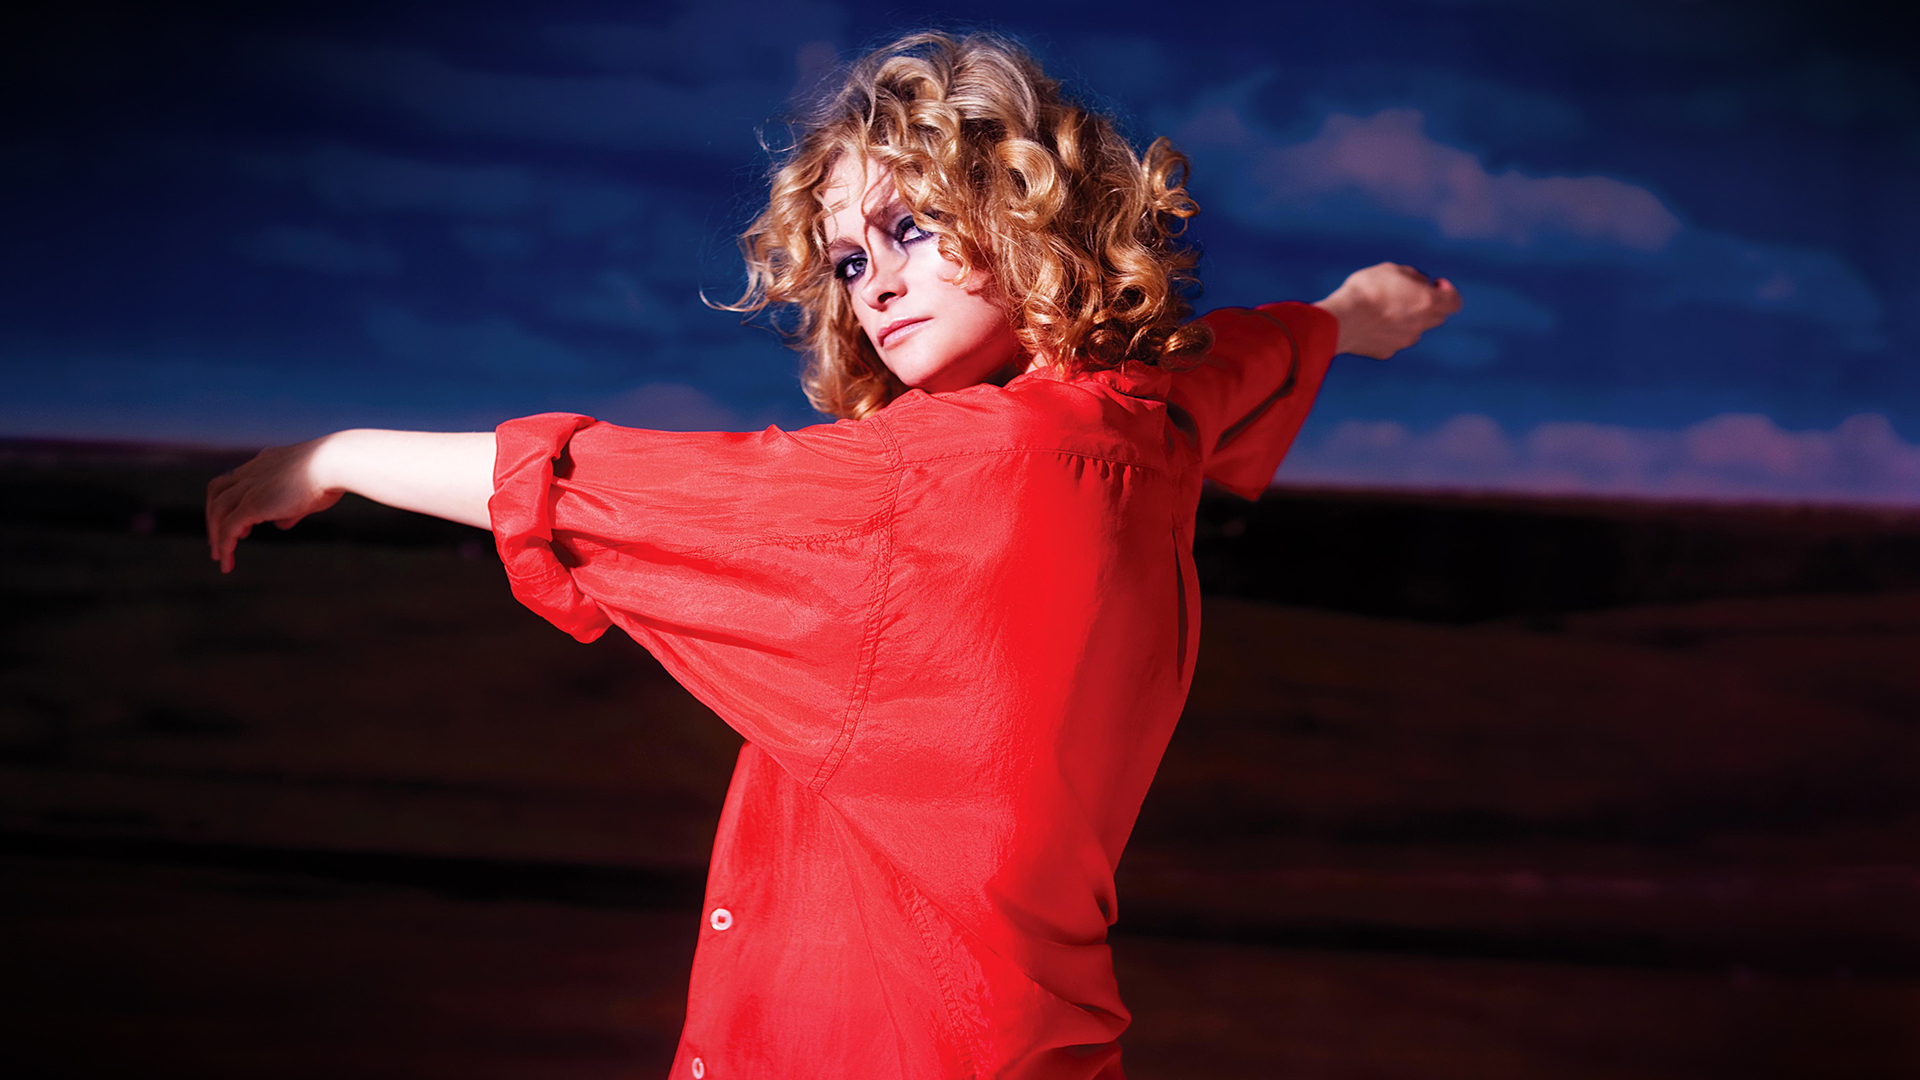 Download mobile wallpaper Goldfrapp, Music for free.